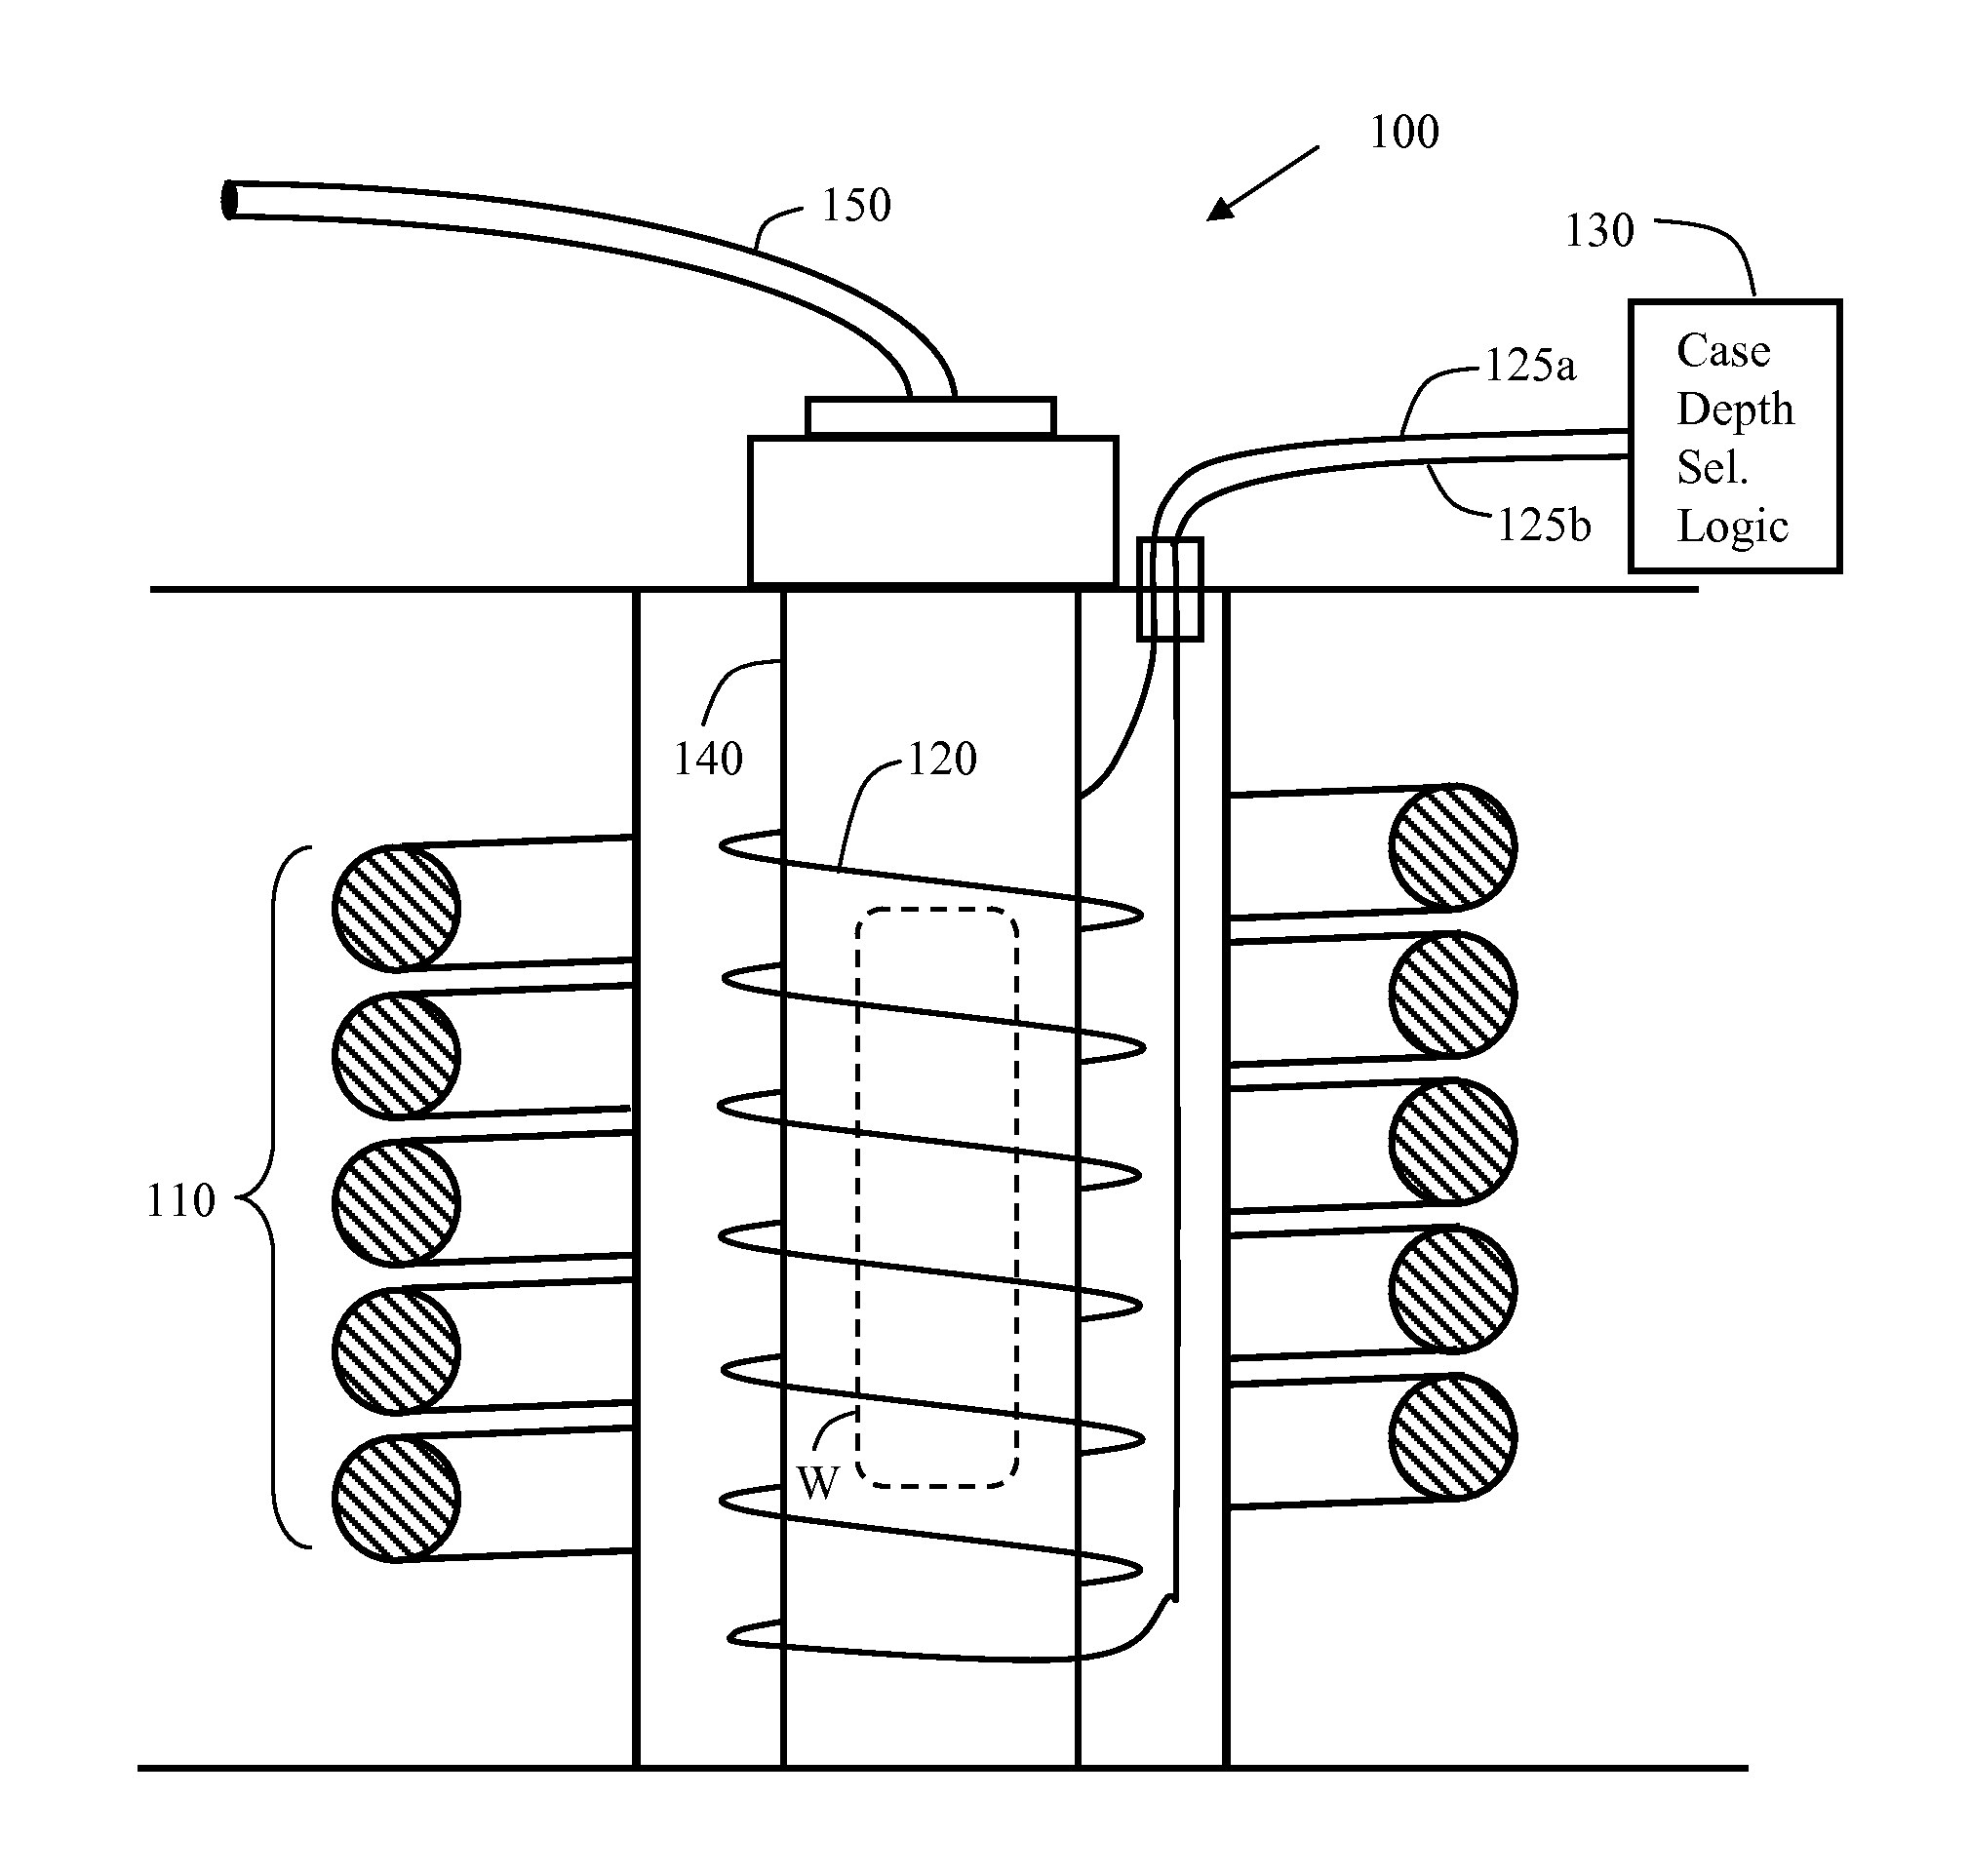 Selective case depth thermo-magnetic processing and apparatus